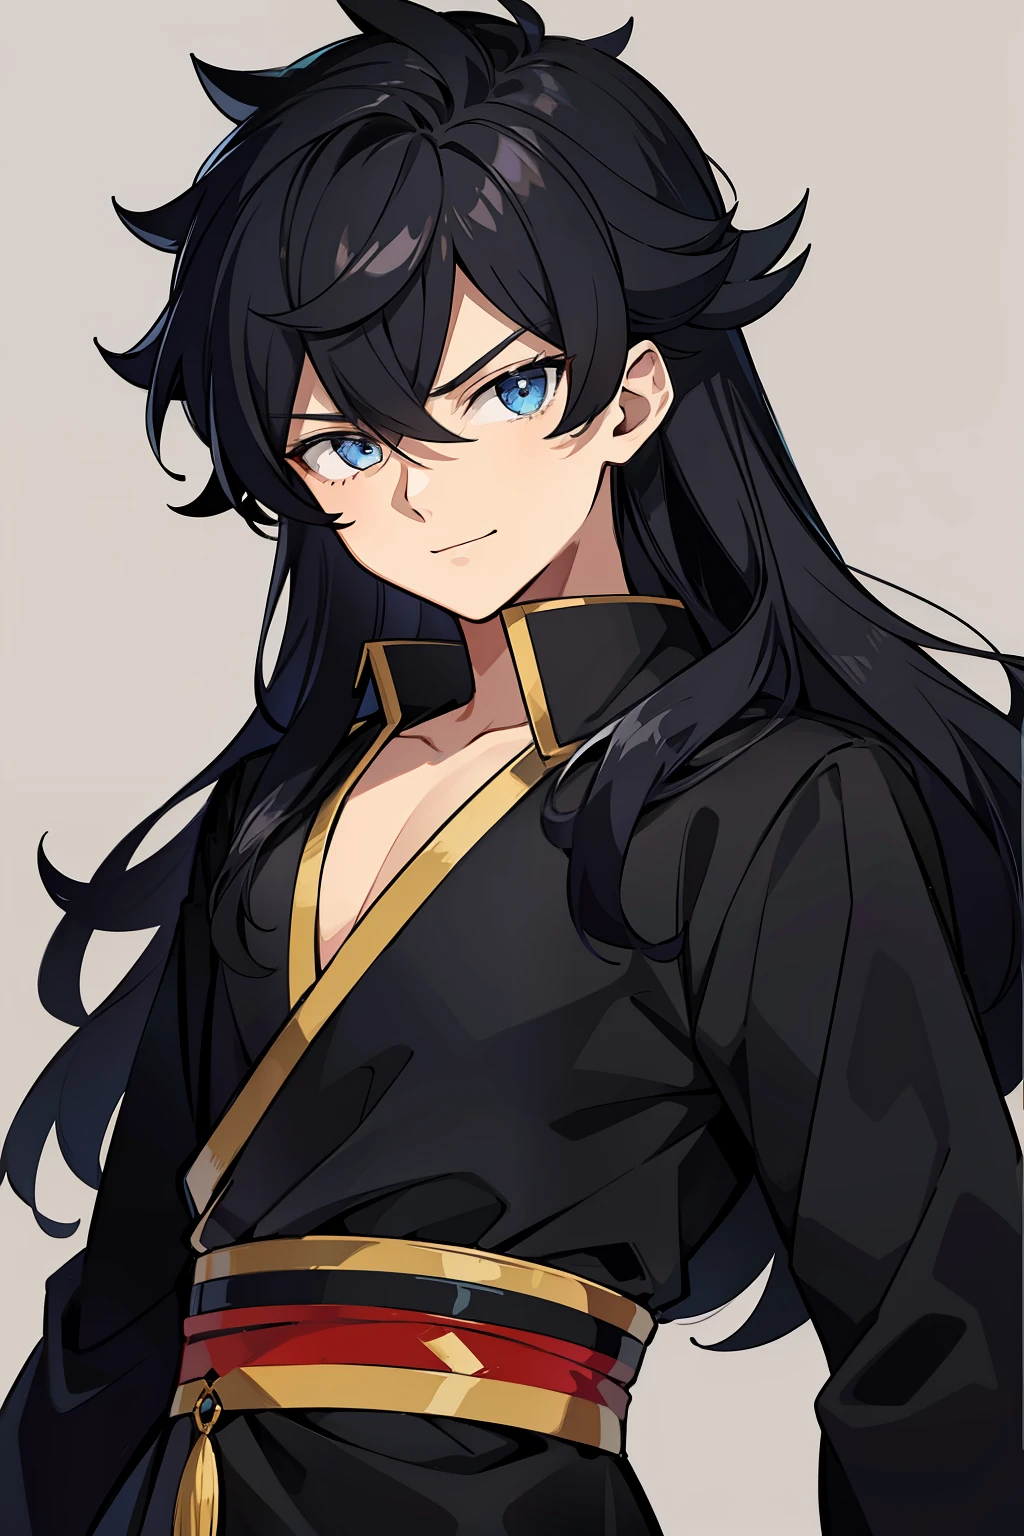 (high-quality, breathtaking),(expressive eyes, perfect face) portrait, 1boy, male, solo, young kid, , black hair, blue coloured eyes, stylised hair, gentle smile, long length hair, loose hair, side bangs, curley hair, really spiky hair, spiked up hair, looking at viewer, portrait, ancient greek clothes, black long sleeved tunic gold trim around collar edges and down middle, greek, red and gold sash, simple background, laurel accessory, slightly narrow eyes, masculine face, masculine eyes, baby face, , happy expression